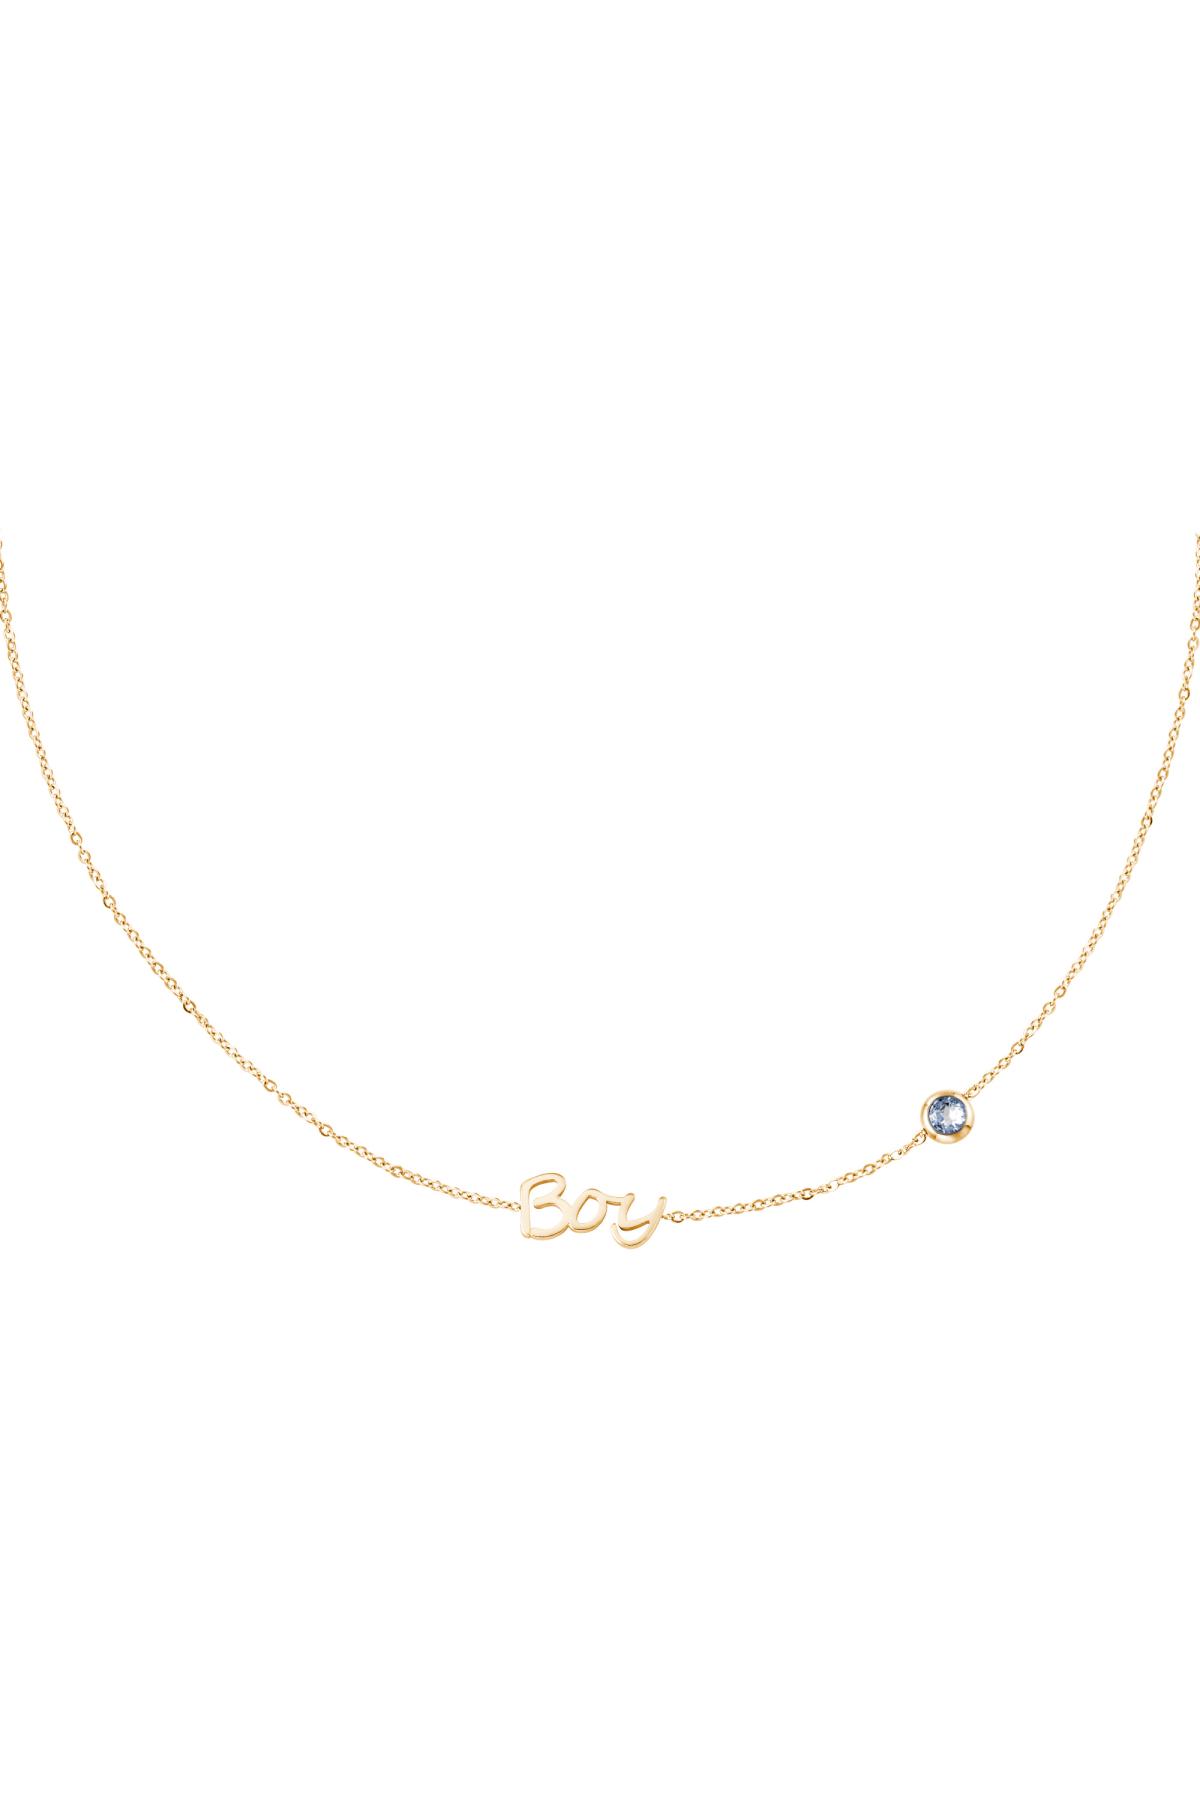 Birthstone Necklace Boy Gold Stainless Steel h5 